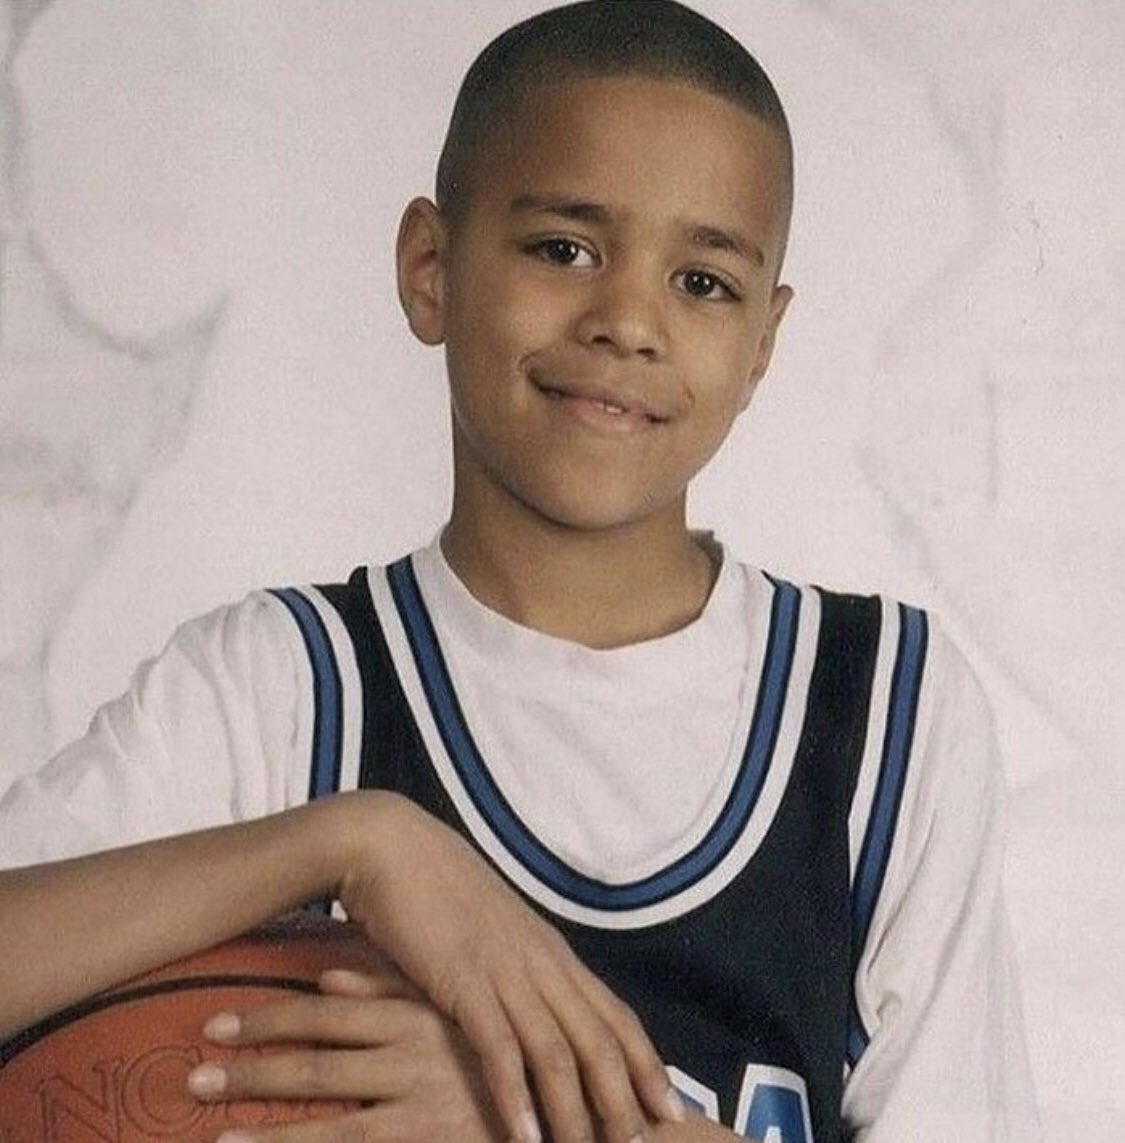 Who knew this kid would grow up to be one of the greatest rapper ever